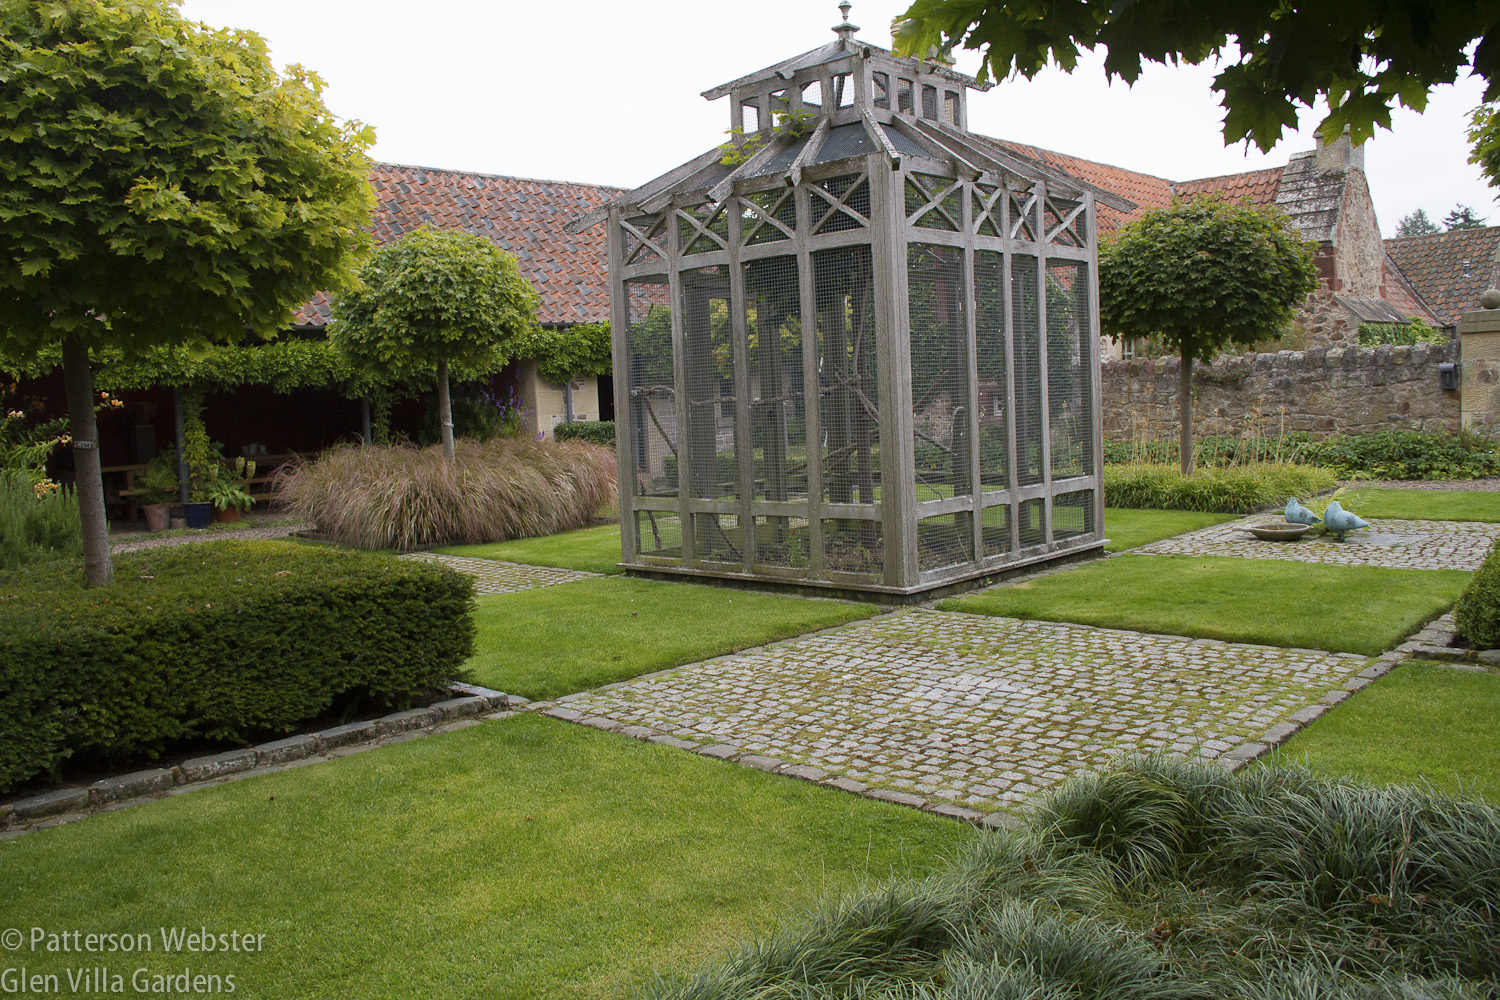 The view on entering the Upper Courtyard gives a hint of the inventiveness that appears throughout the garden.